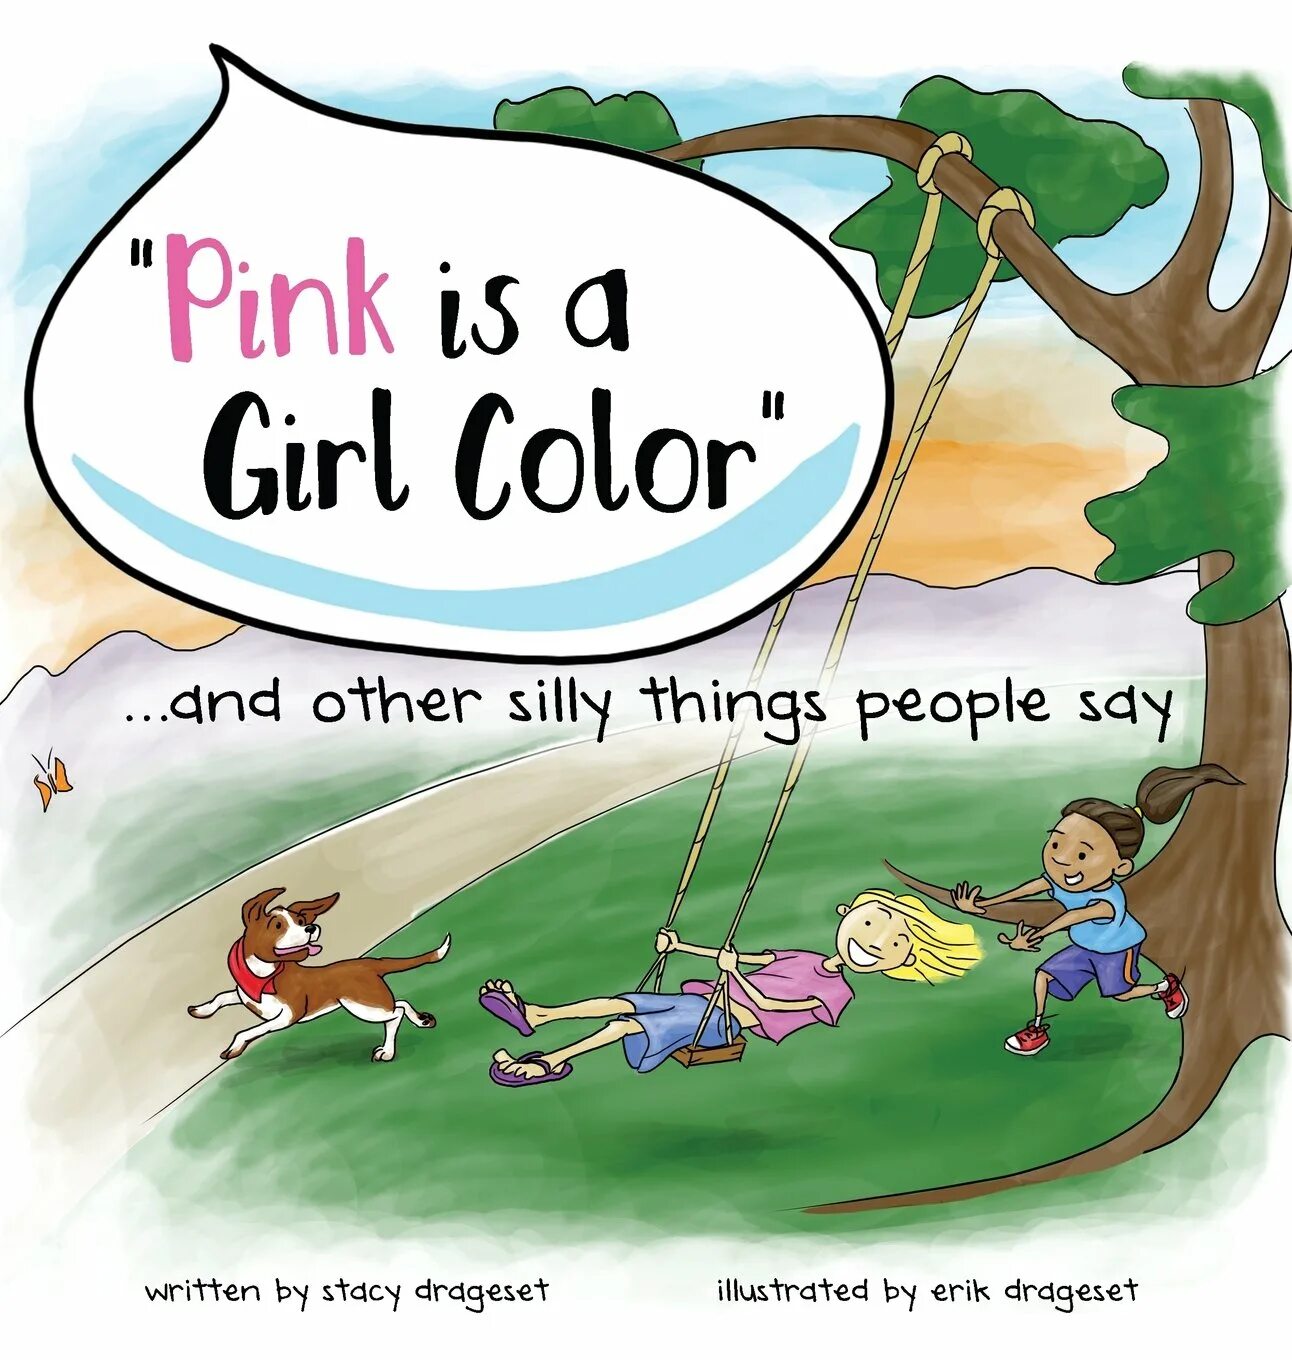 Silly things. Silly things picture. Раскрасить рисунок по описанию Color the Sky is Blue the girls Dress is Pink. Silly thing